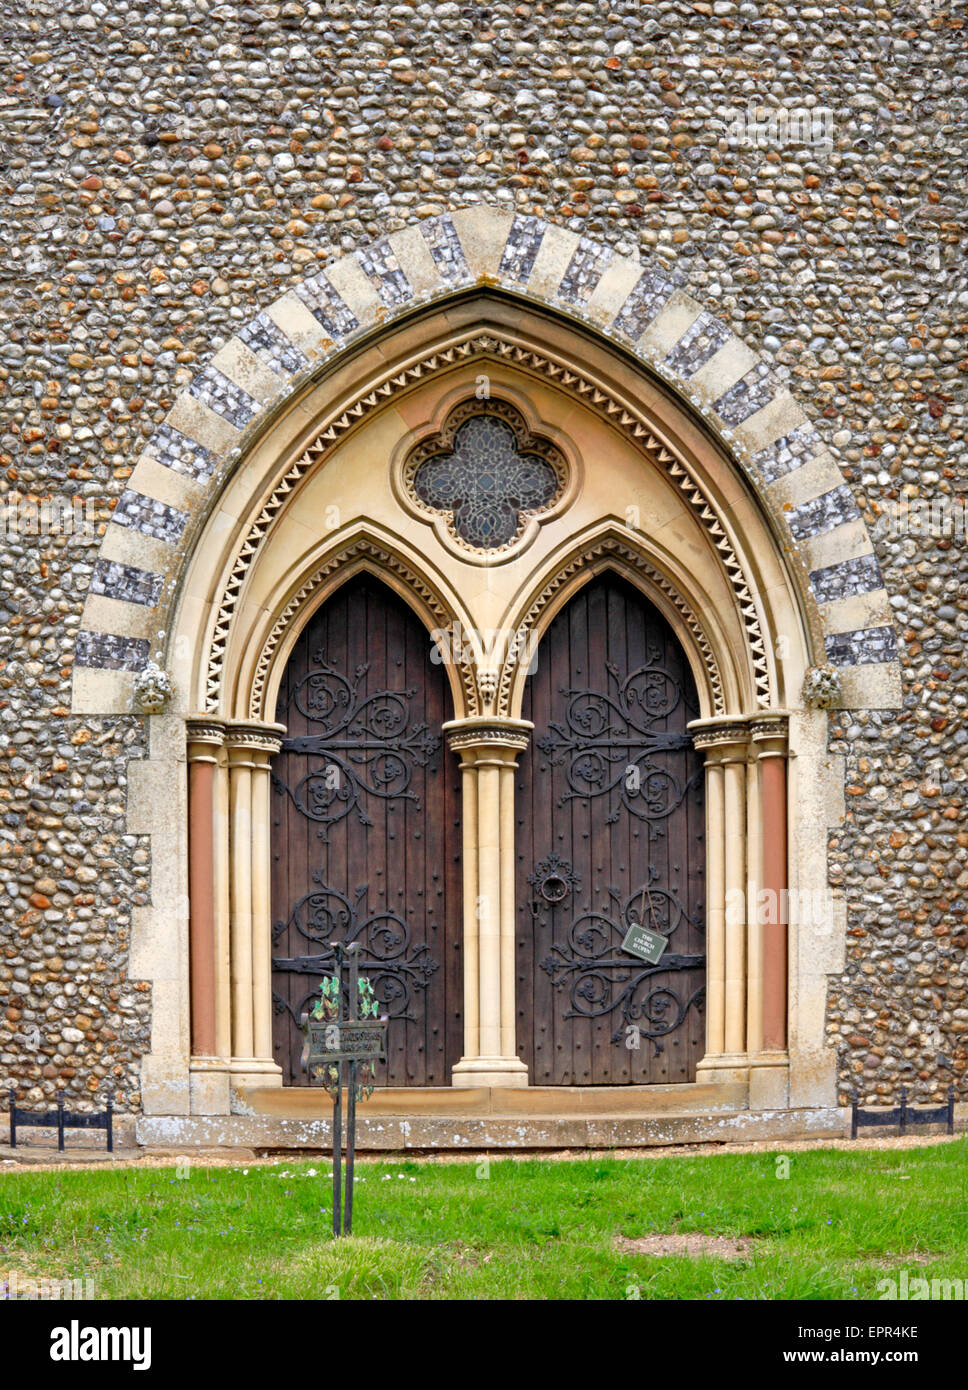 The south porch entrance in the tower of the parish church of St Withburga at Holkham, Norfolk, England, United Kingdom. Stock Photo